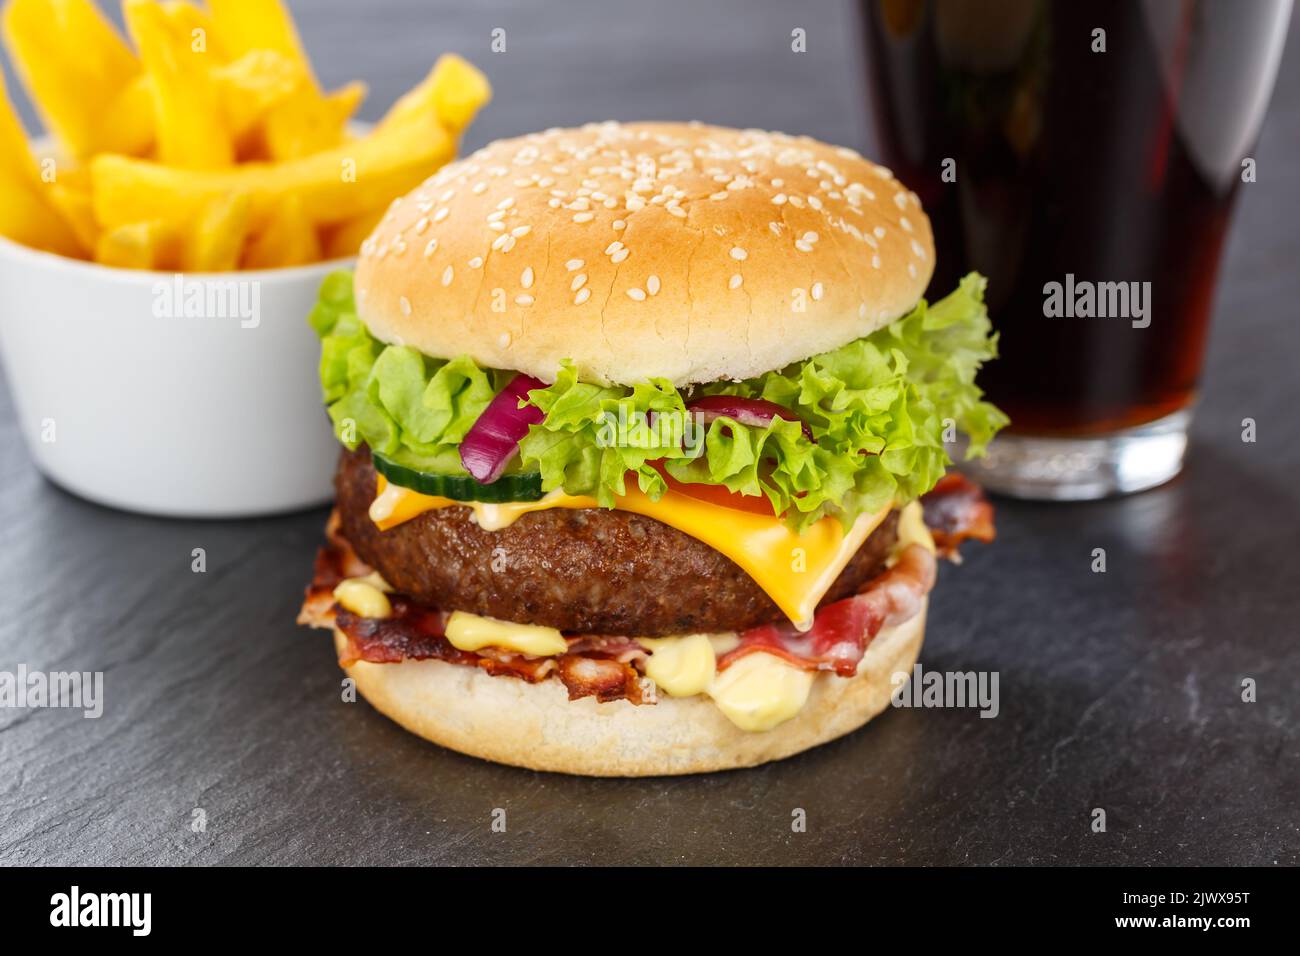 Hamburger Cheeseburger meal fastfood fast food with cola drink and French Fries on a slate menu Stock Photo